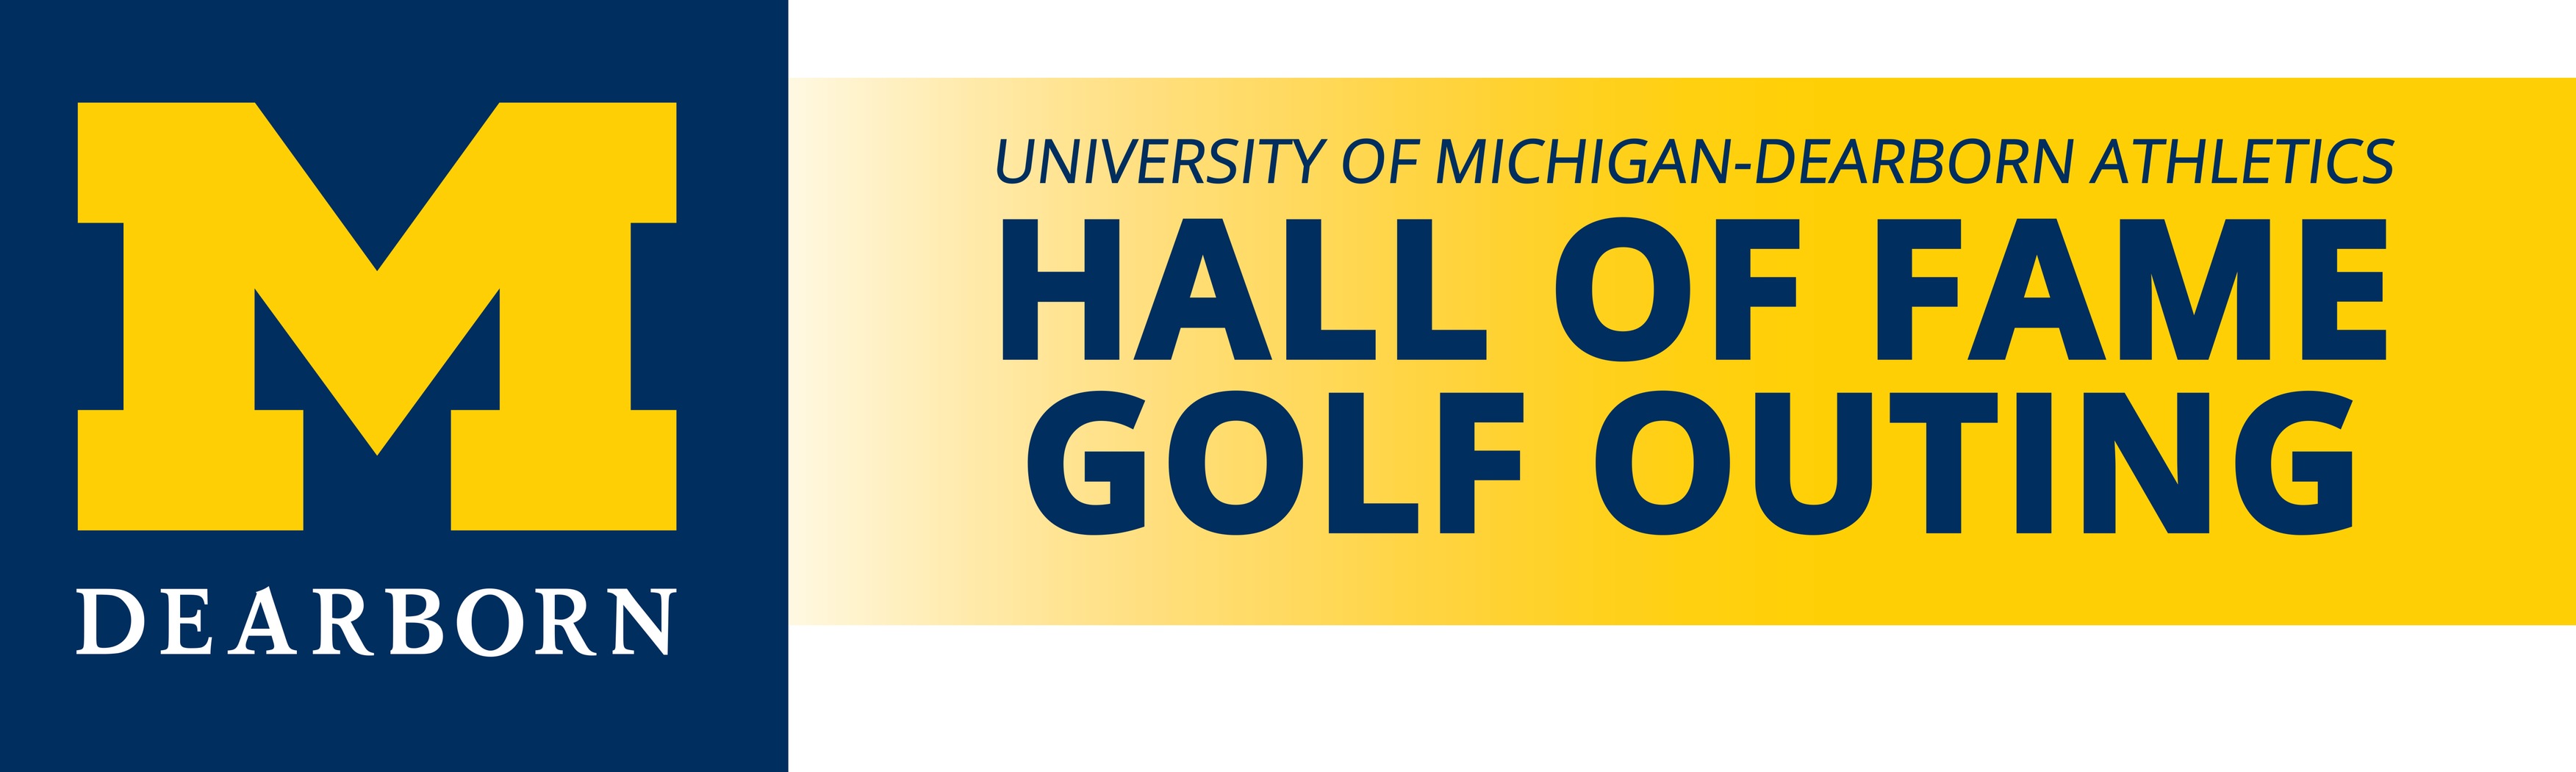 RESCHEDULED: University Of Michigan - Dearborn Announces 2021 Hall of Fame Golf Outing presented by W3R Consulting